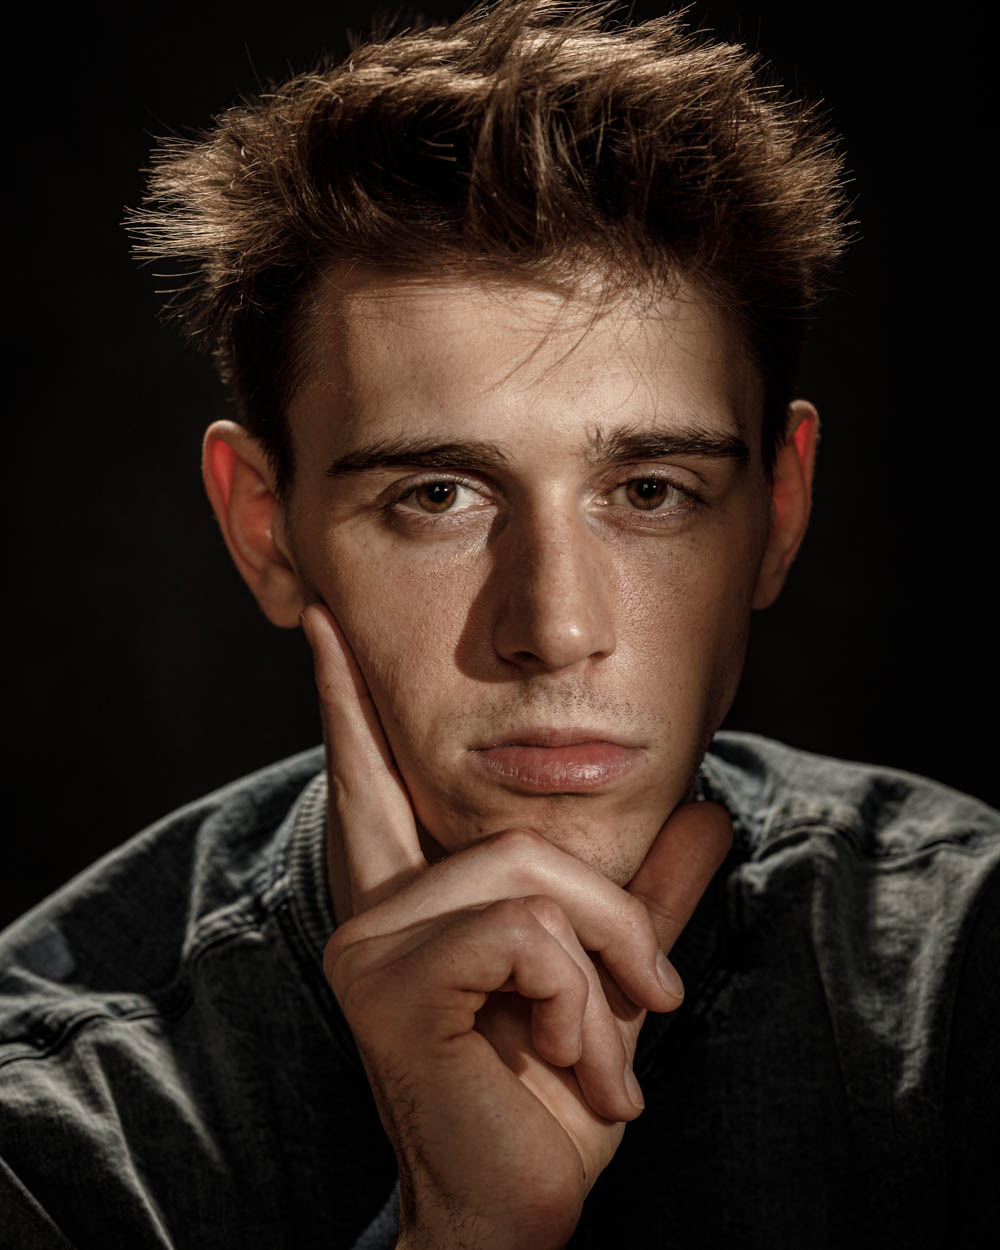 Intense close-up of Jonathan at our Chicago model photography studio